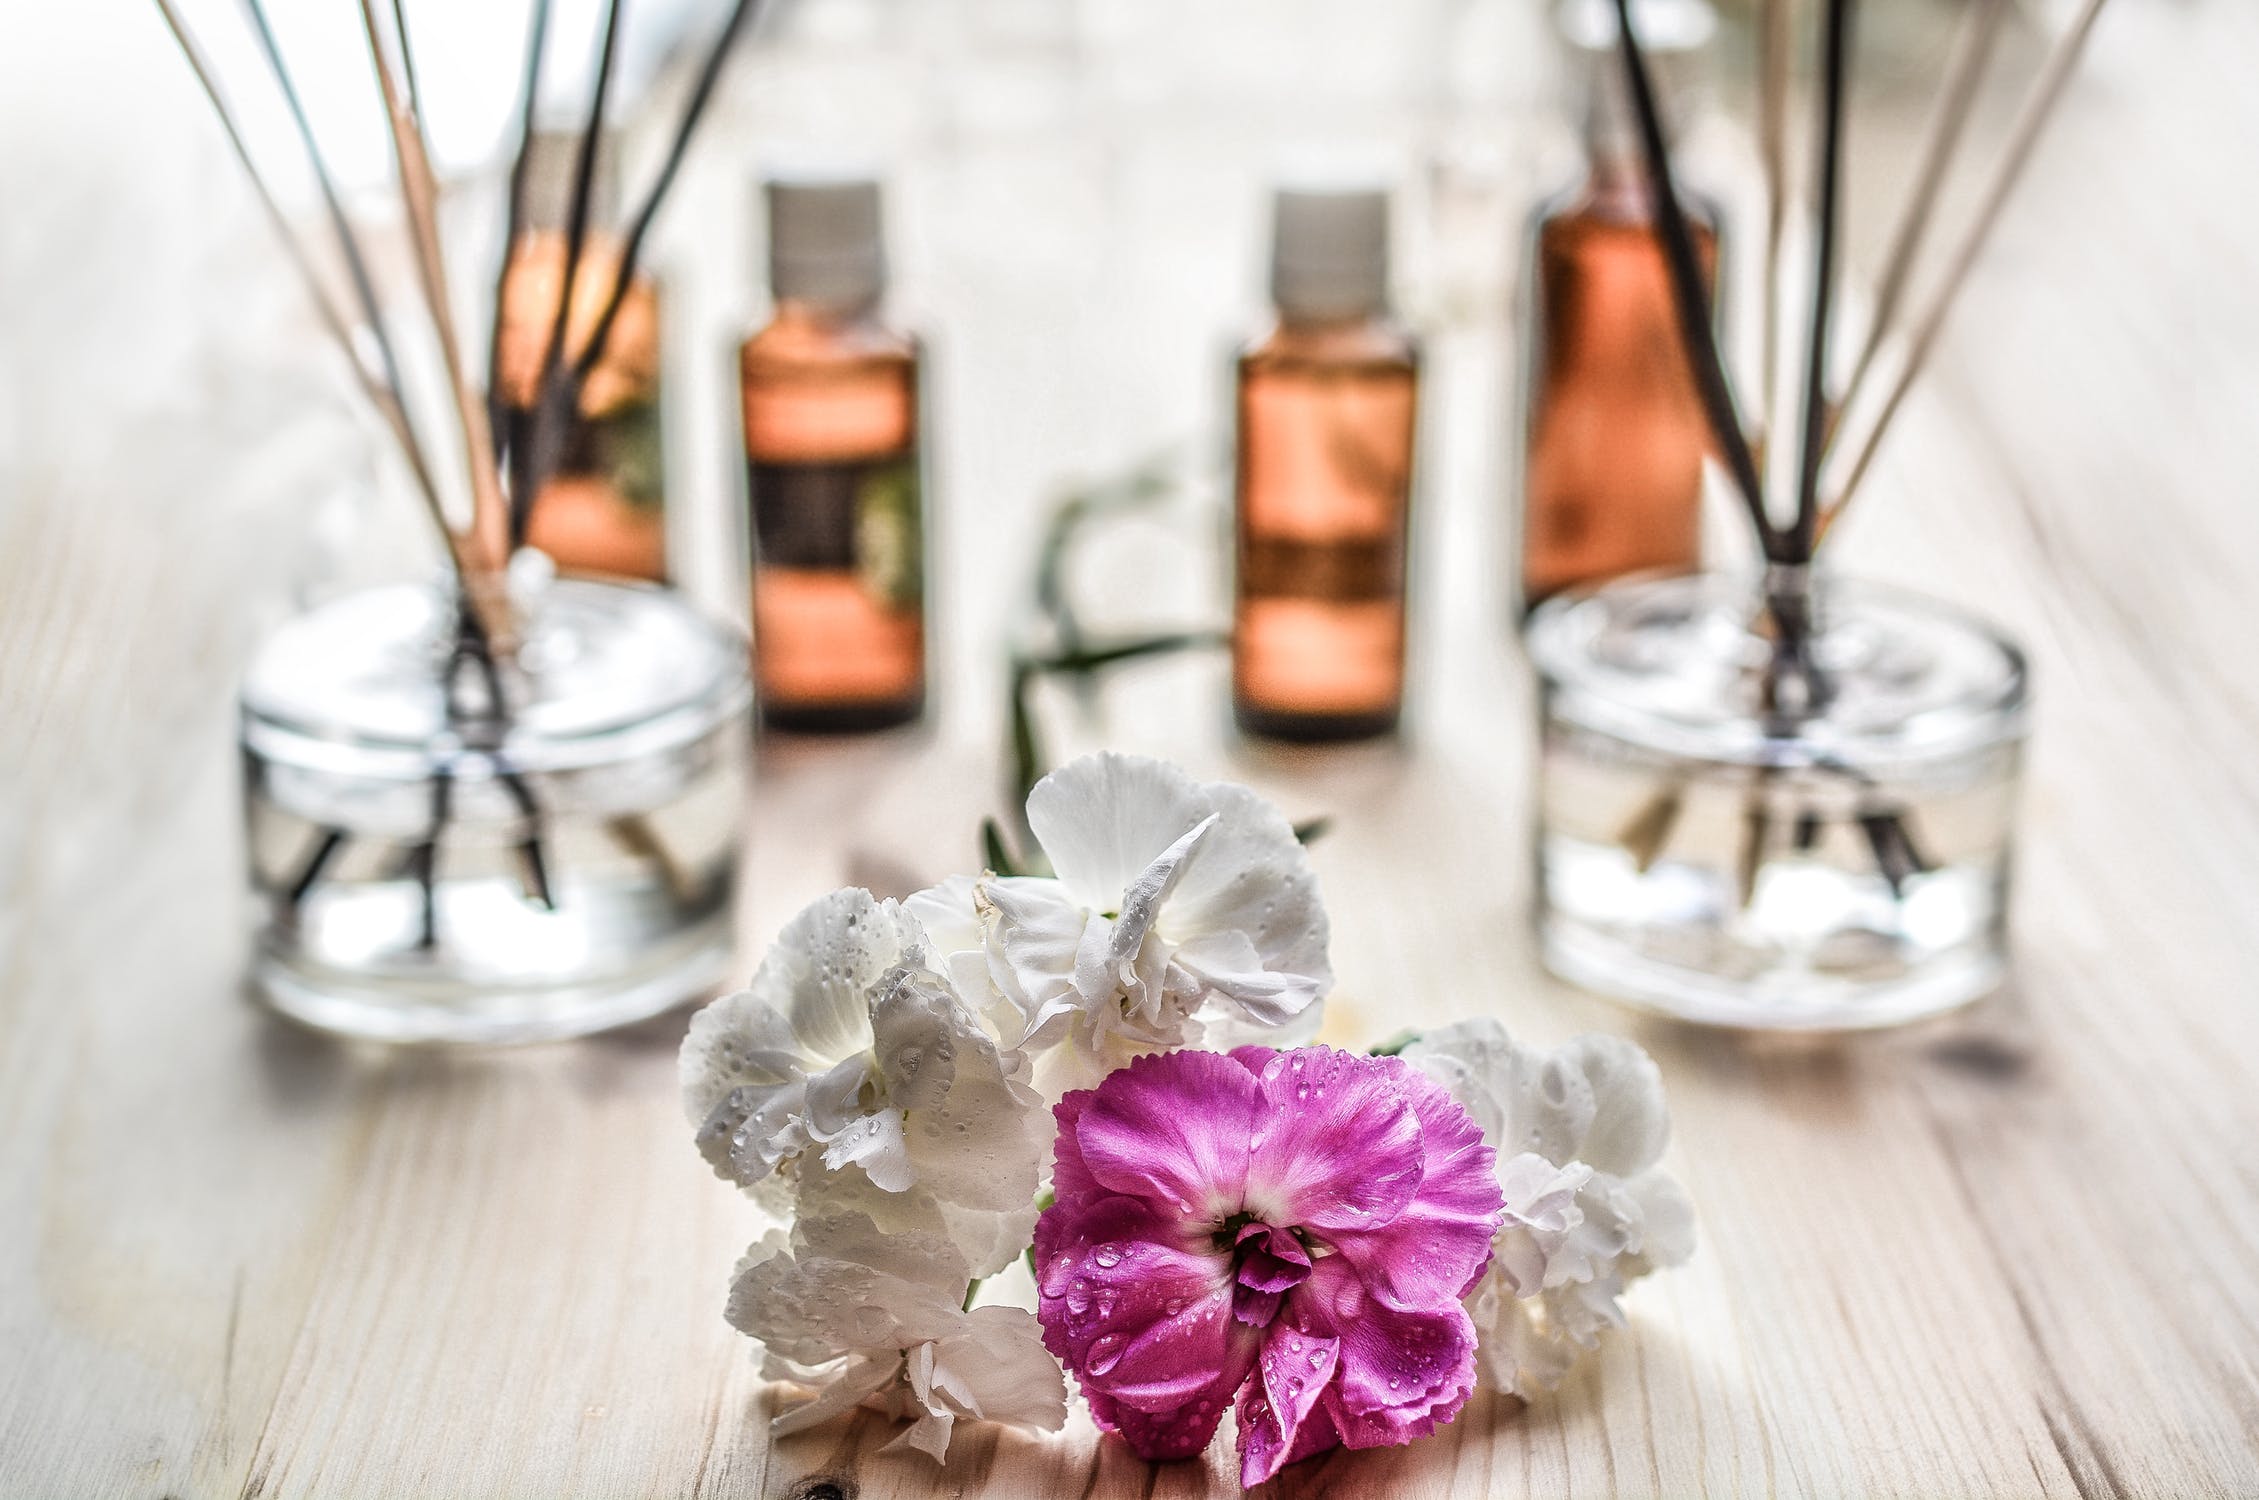 Aromatherapy Oils, Diffusers and Benefits (Including Stress Relief)